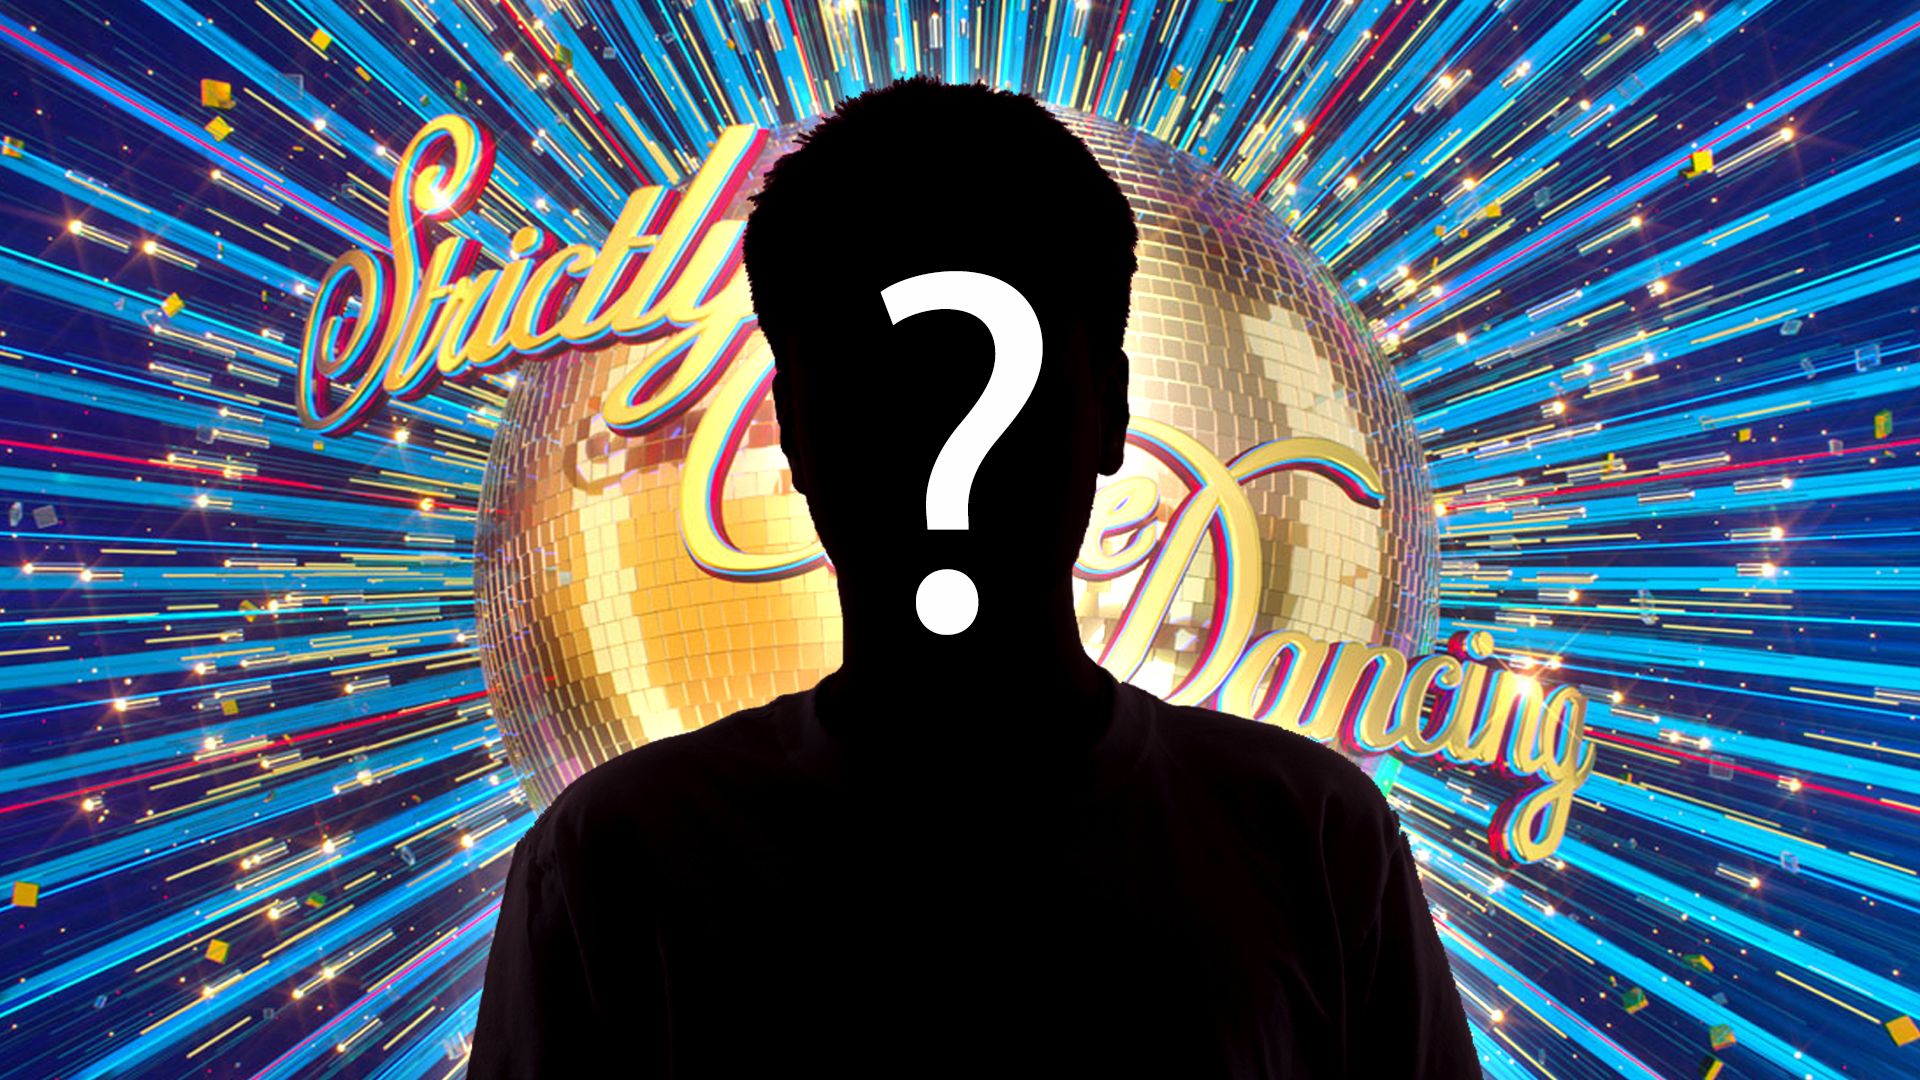 Strictly Come Dancing mystery man